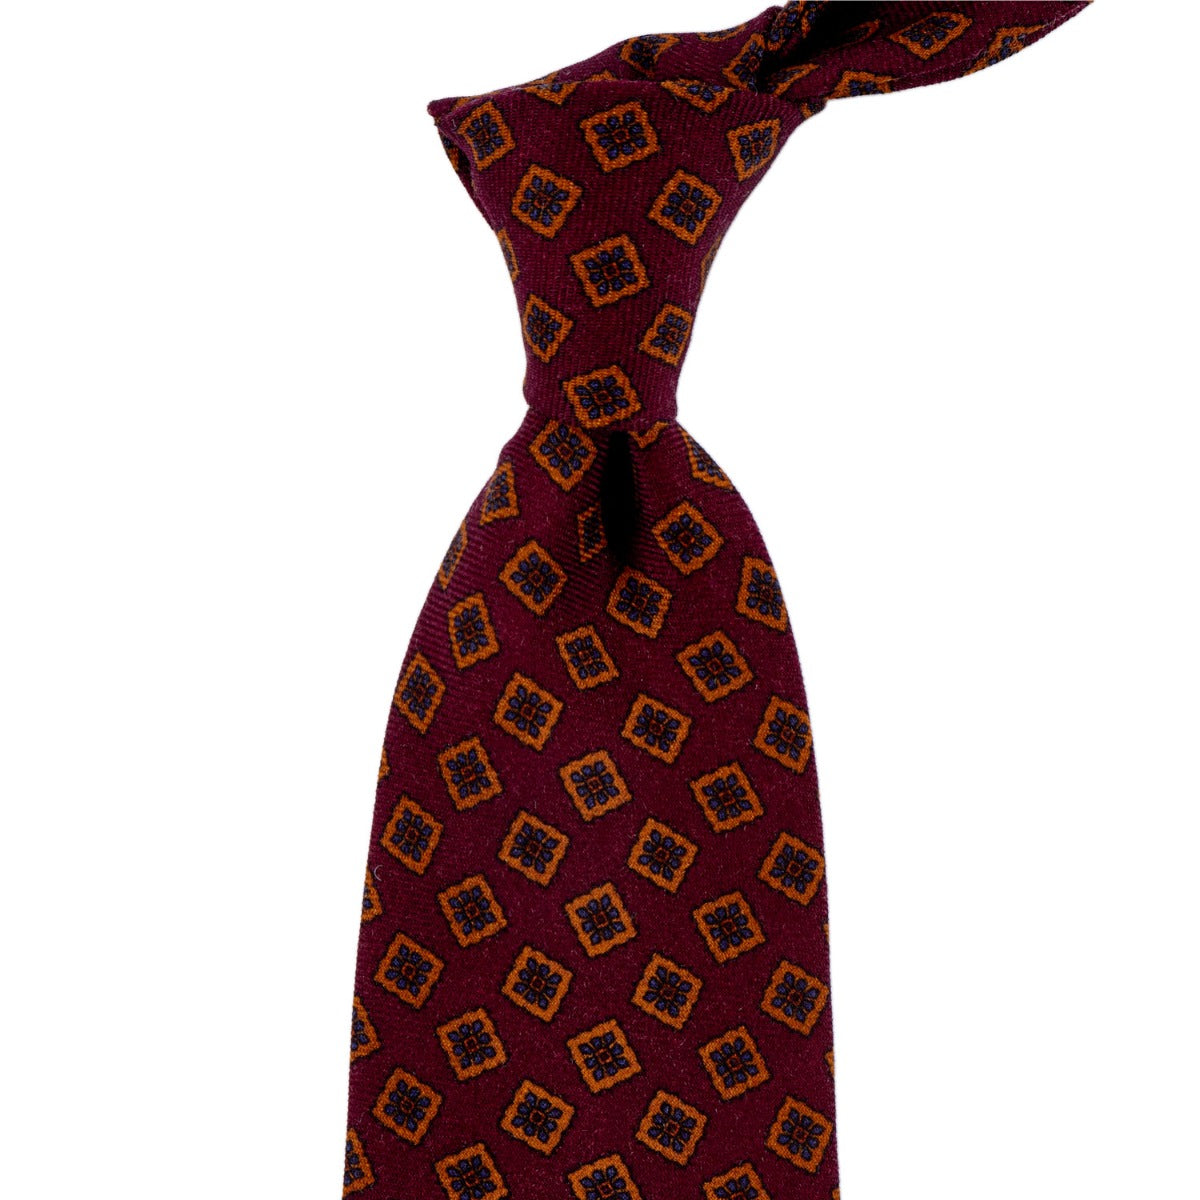 A Sovereign Grade Burgundy Tossed Square Wool Challis Tie handmade in the United Kingdom, available at KirbyAllison.com.